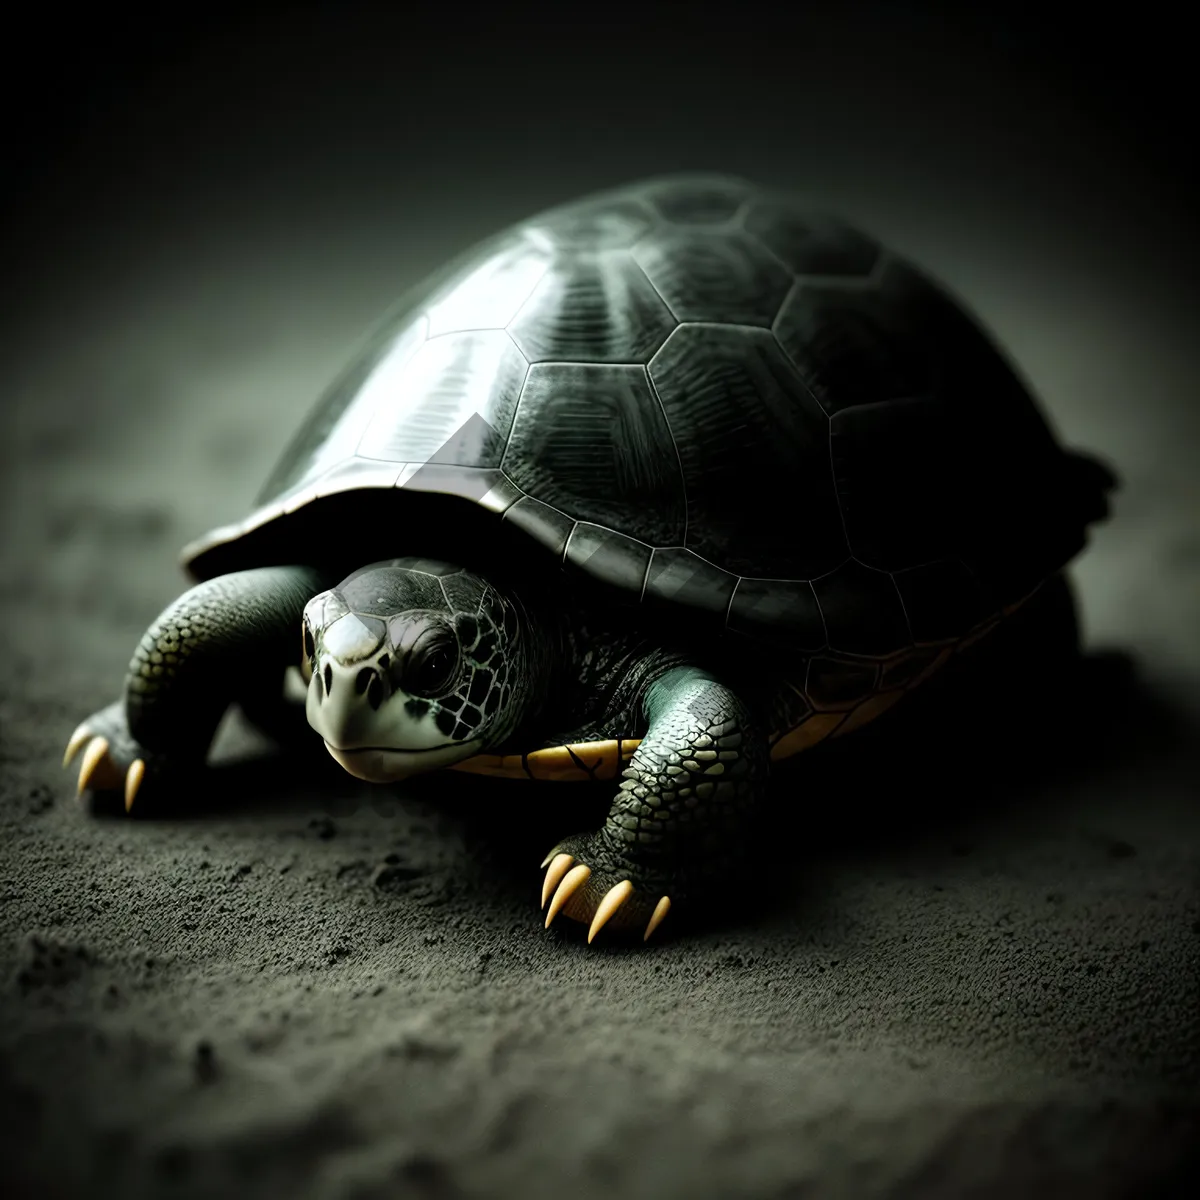 Picture of Terrapin Turtle: Slow-moving reptile with protective shell